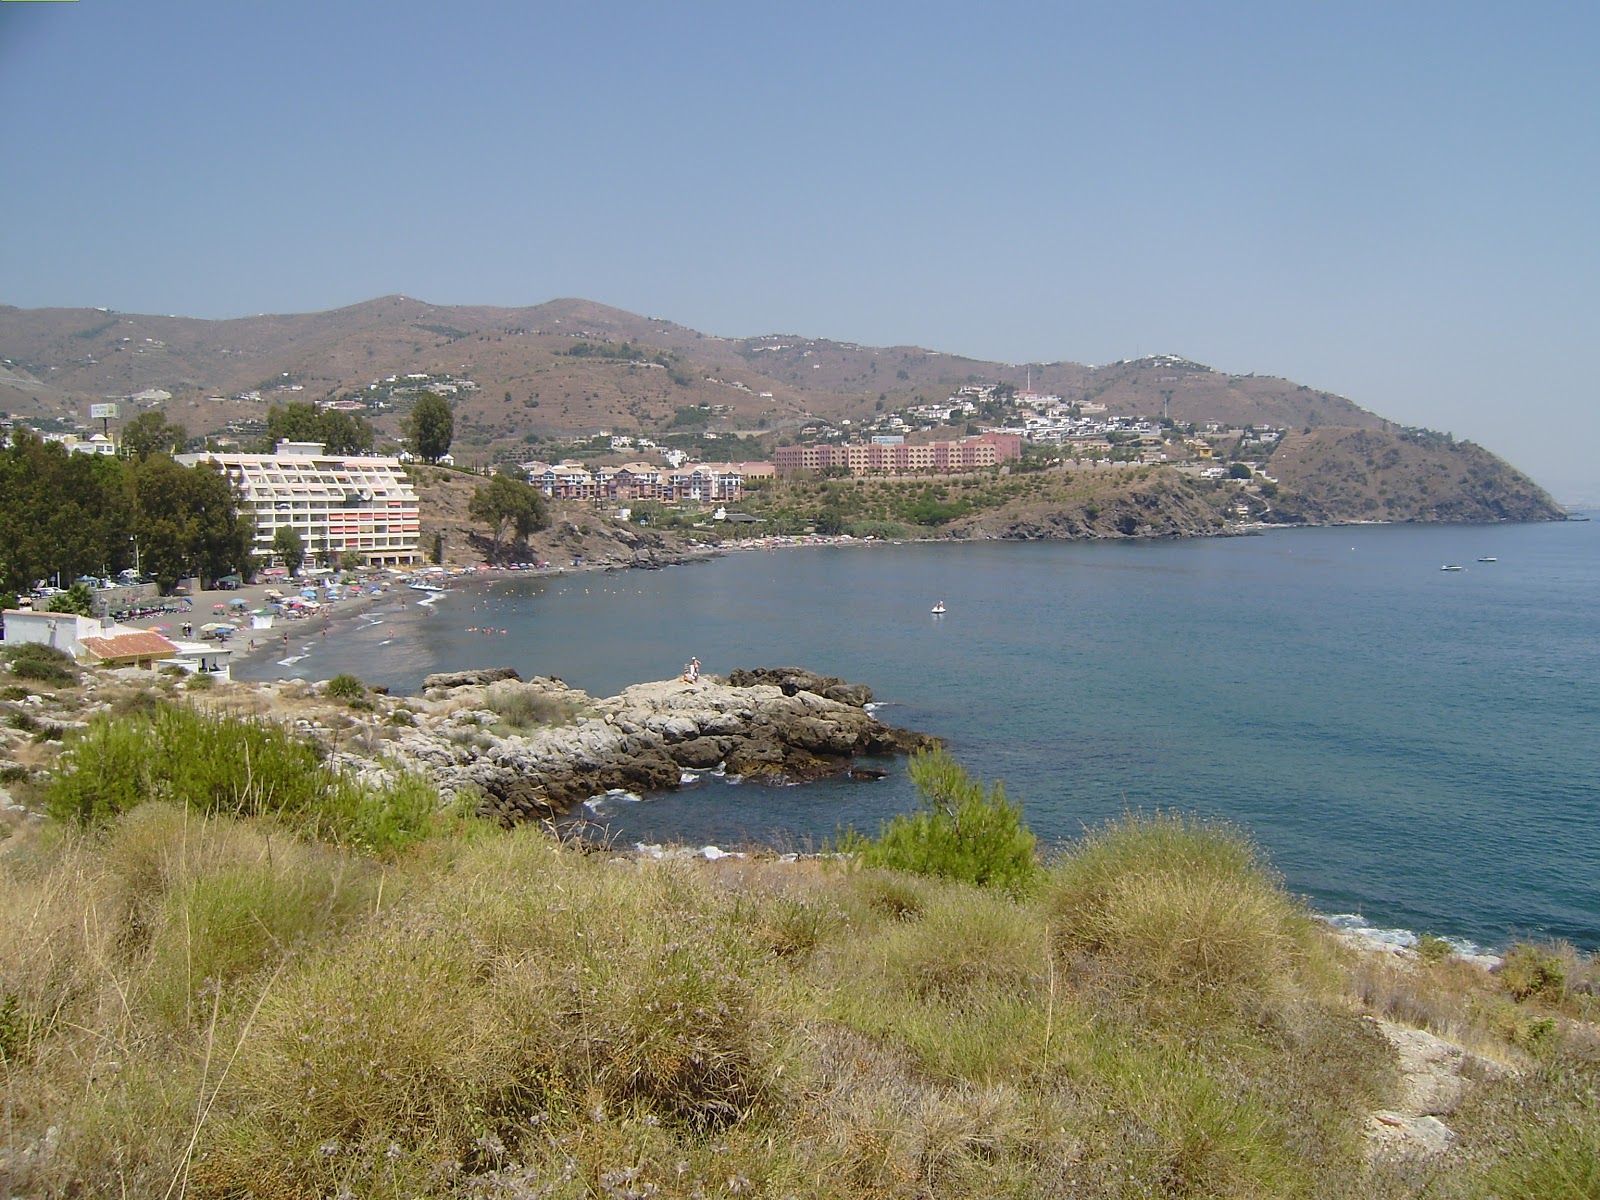 Photo of Playa del Pozuelo and the settlement